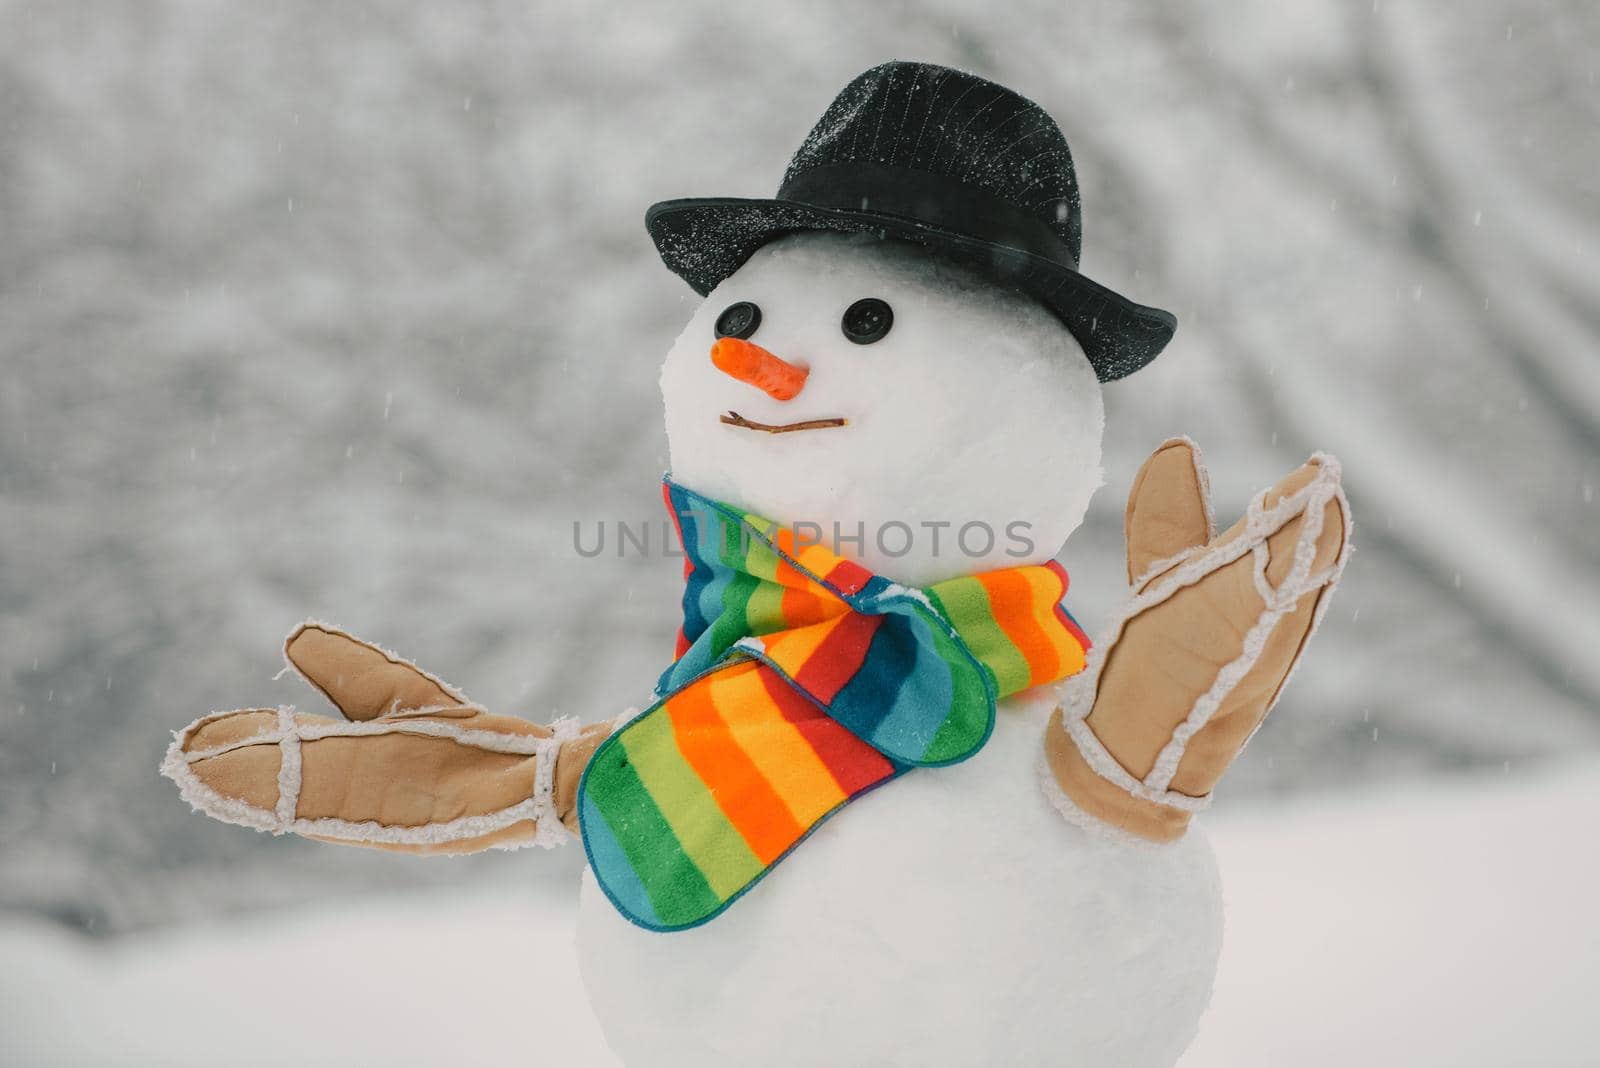 Snowman with hat and scarf in winter outdoor. Happy smiling snow man on sunny winter day. Christmas card. by Tverdokhlib